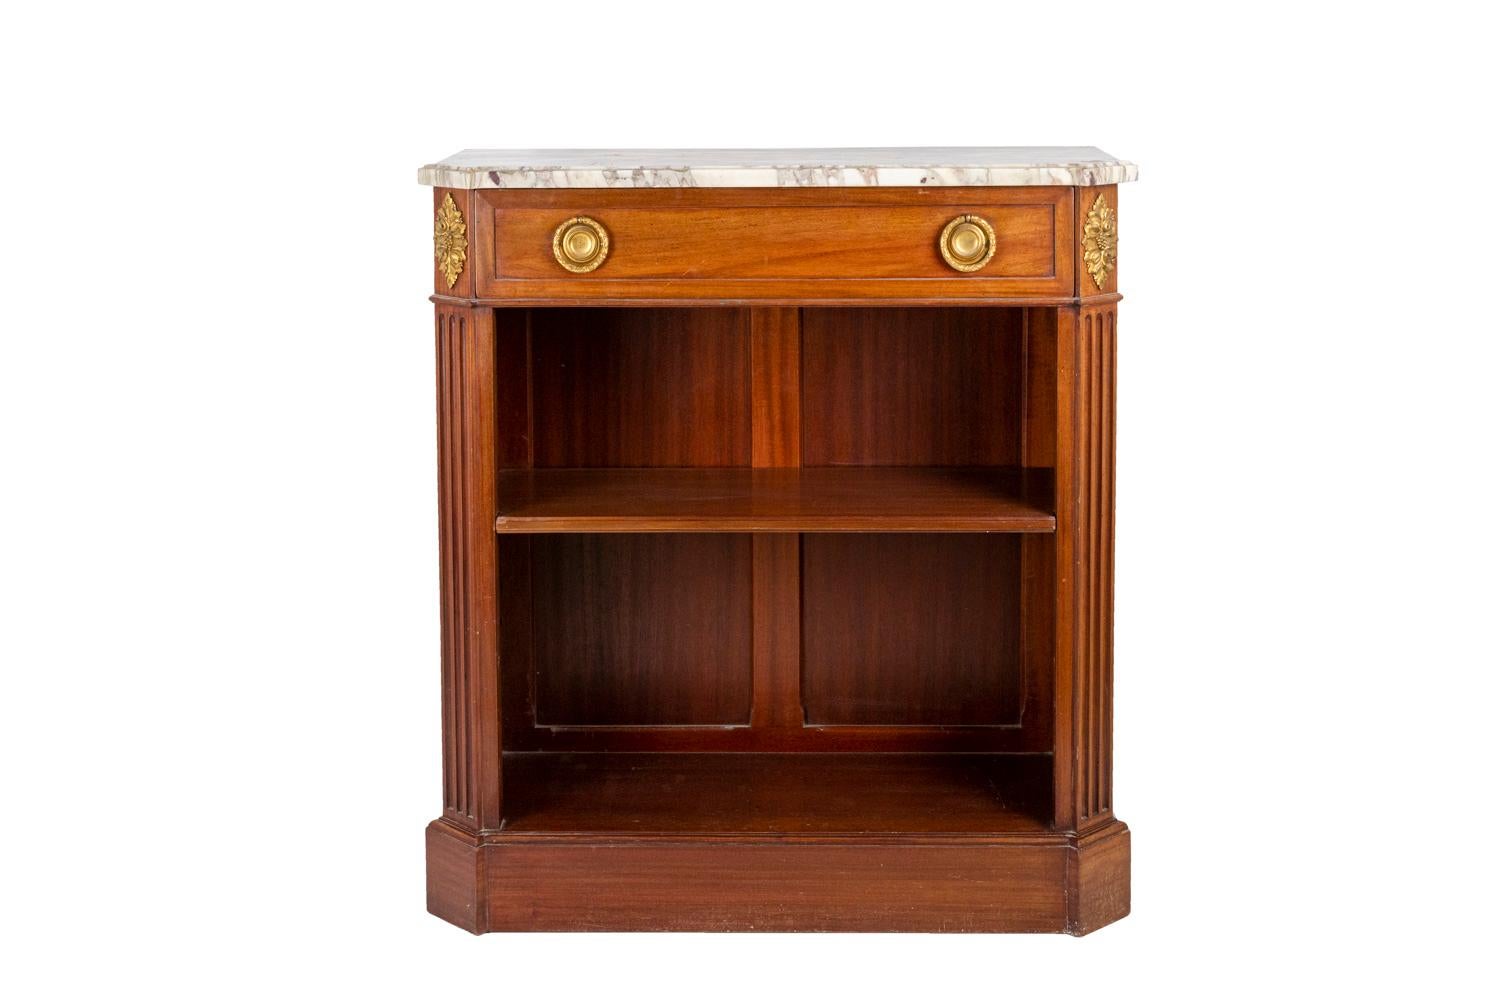 Louis XVI style bookshelf in mahogany with one shelf and opening by a front drawer. Body with canted corners adorned with flutes. Gilt bronze ornamentation such as handles in laurel wreath shape and rosettes on angles.
Molded tray with canted